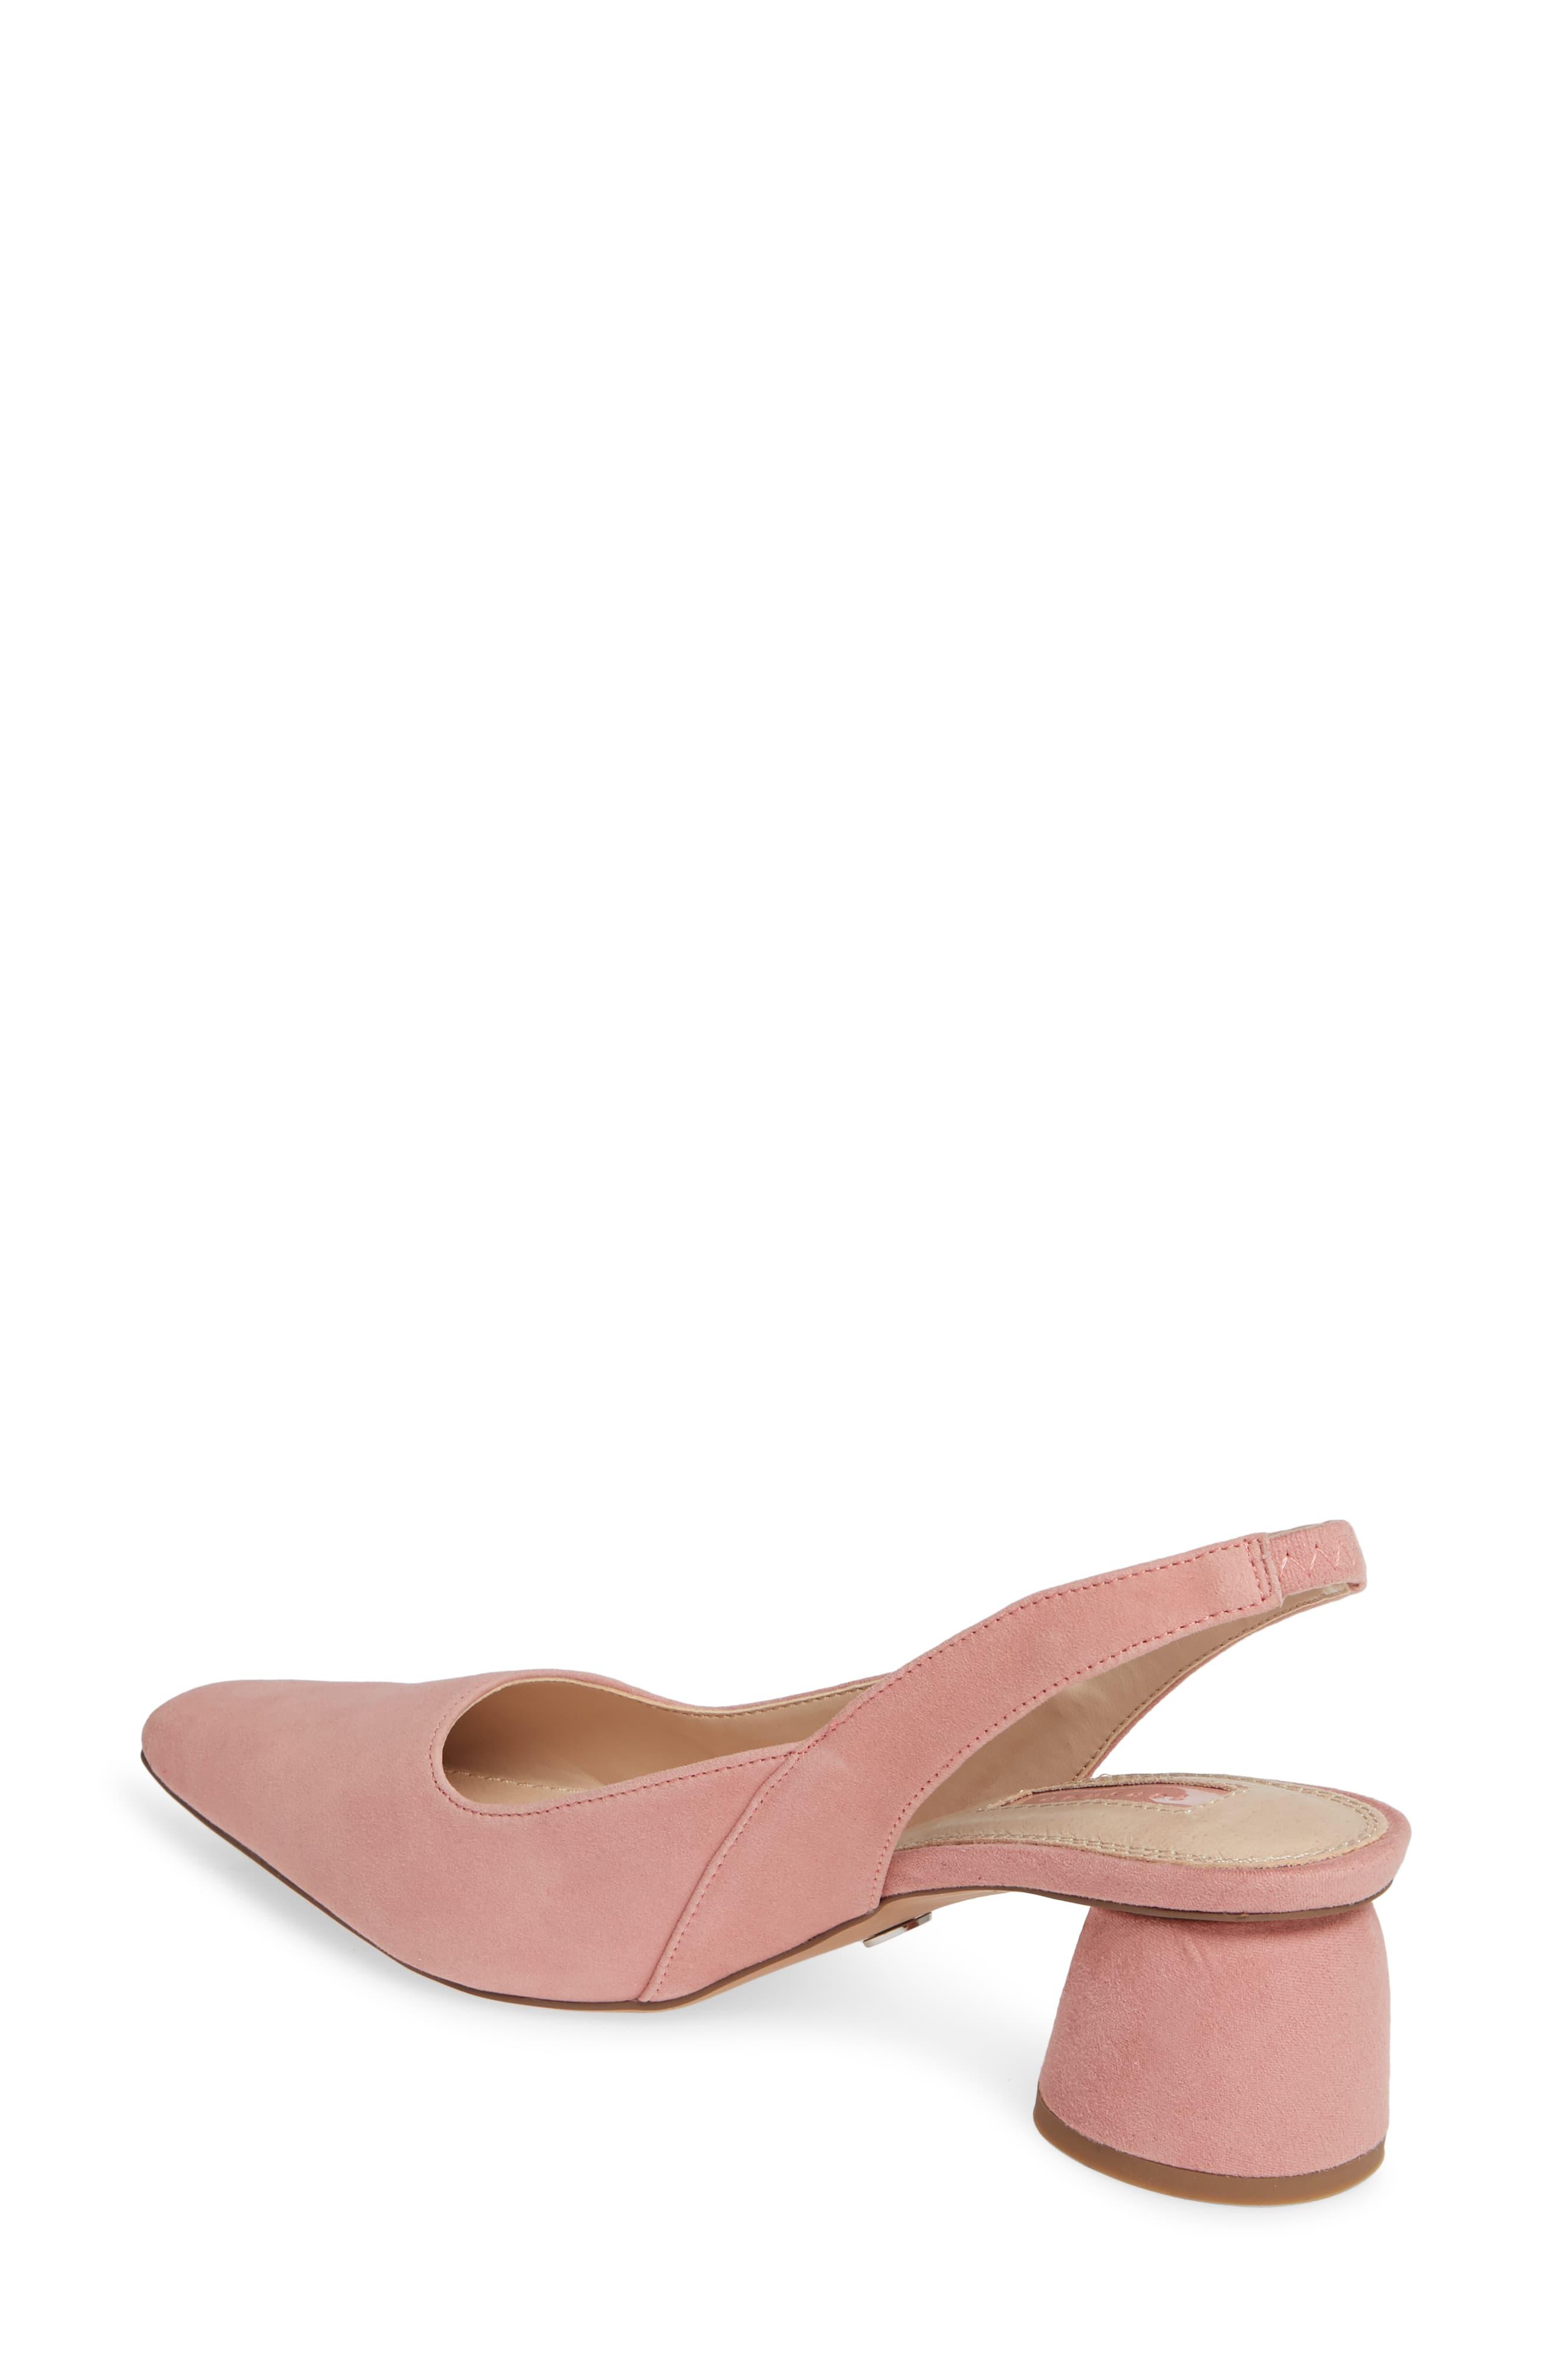 justify slingback shoes